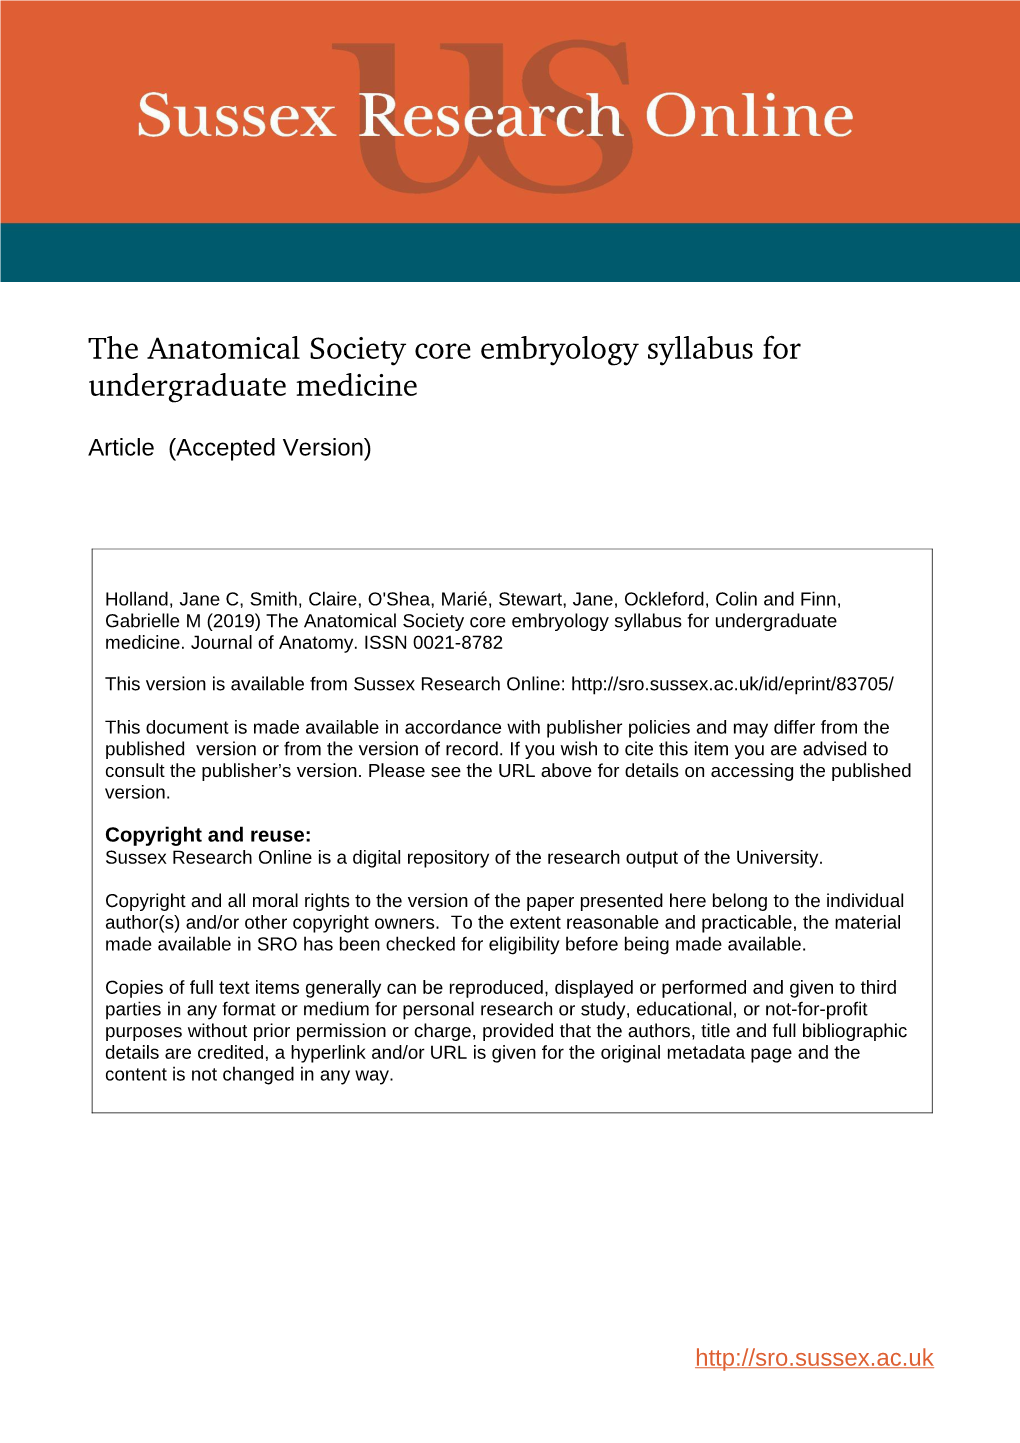 The Anatomical Society Core Embryology Syllabus for Undergraduate Medicine